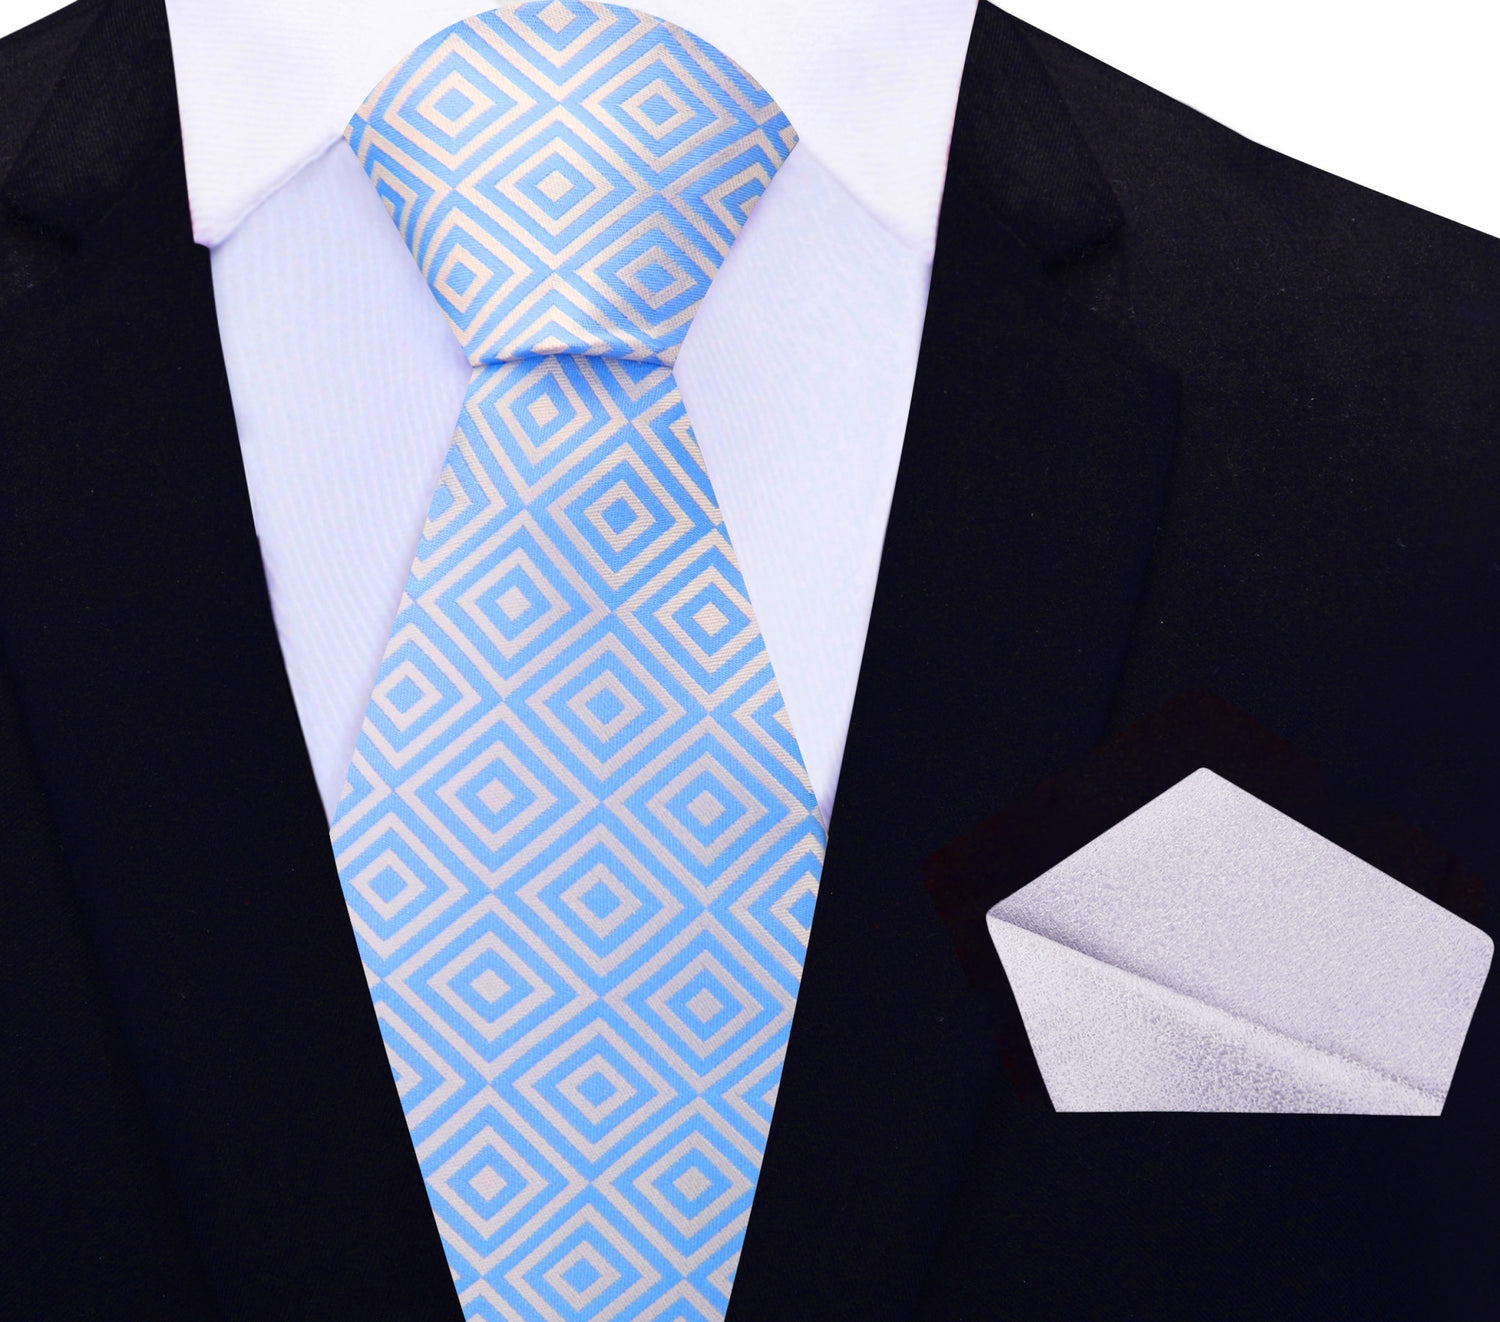 White, Light Blue Geometric Tie and Shimmer Silver Pocket Square